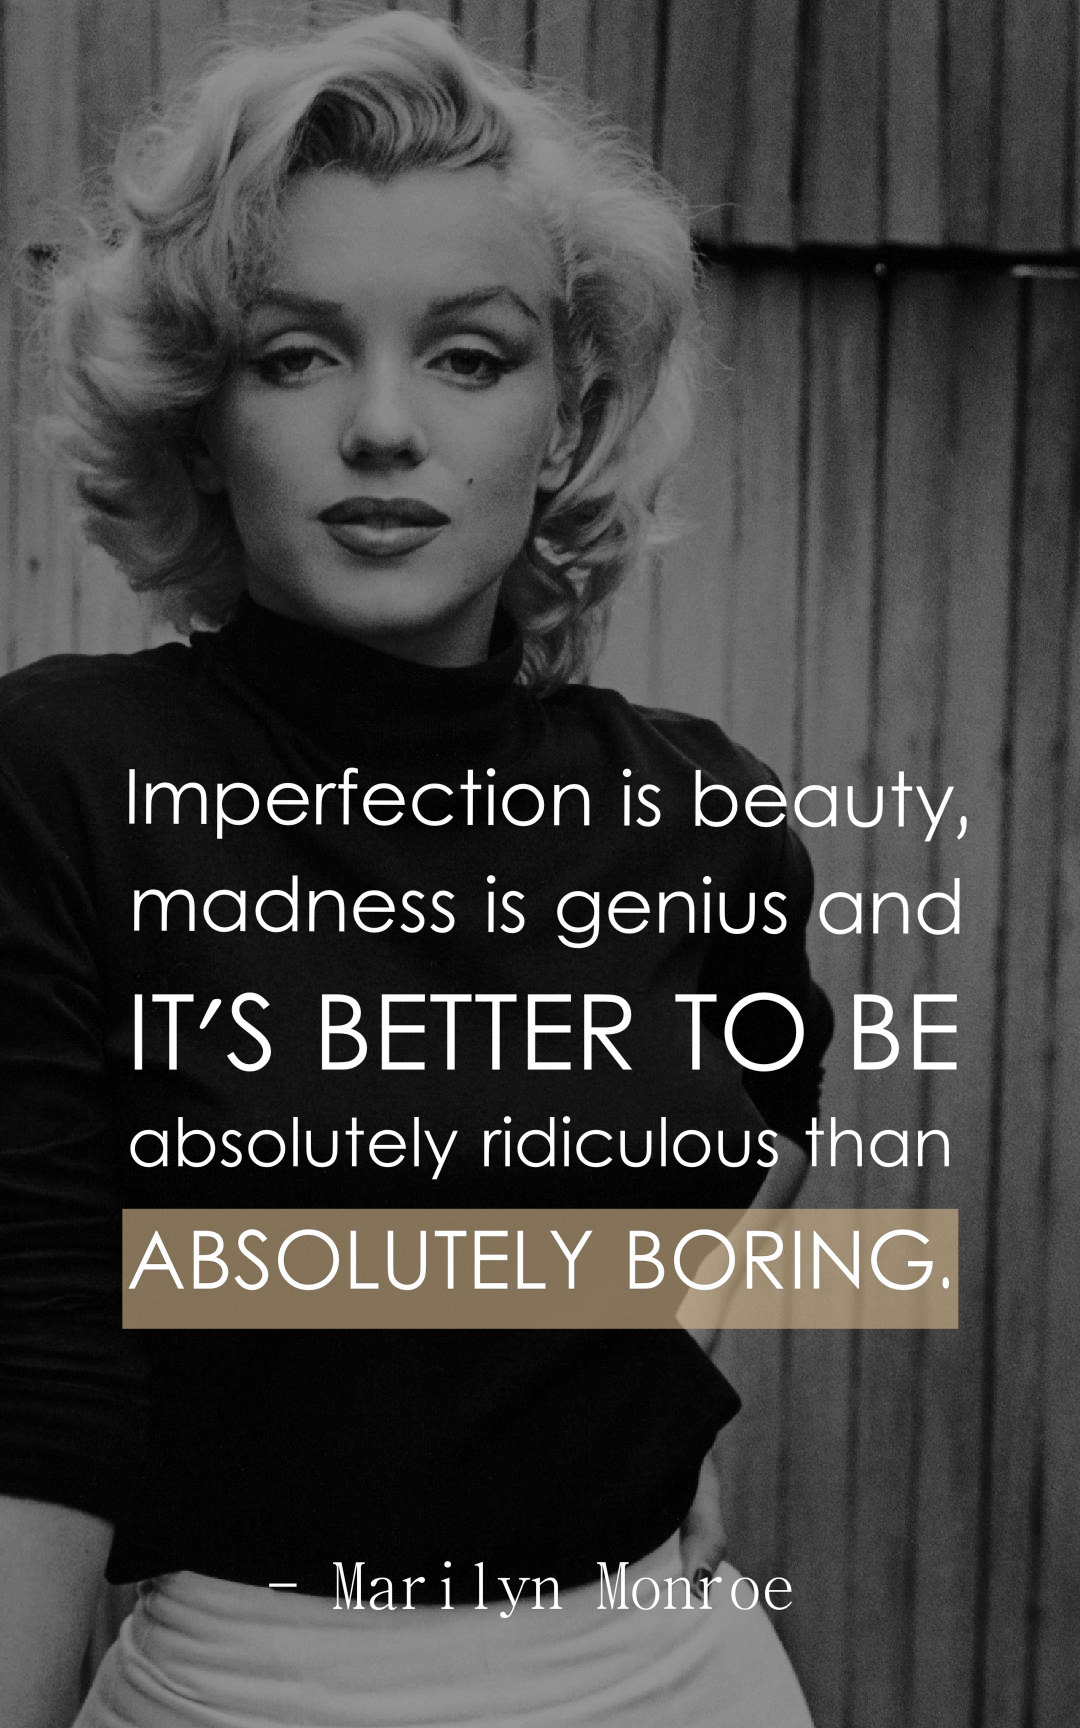 Marilyn Monroe Picture Quotes Quotesir | Hot Sex Picture